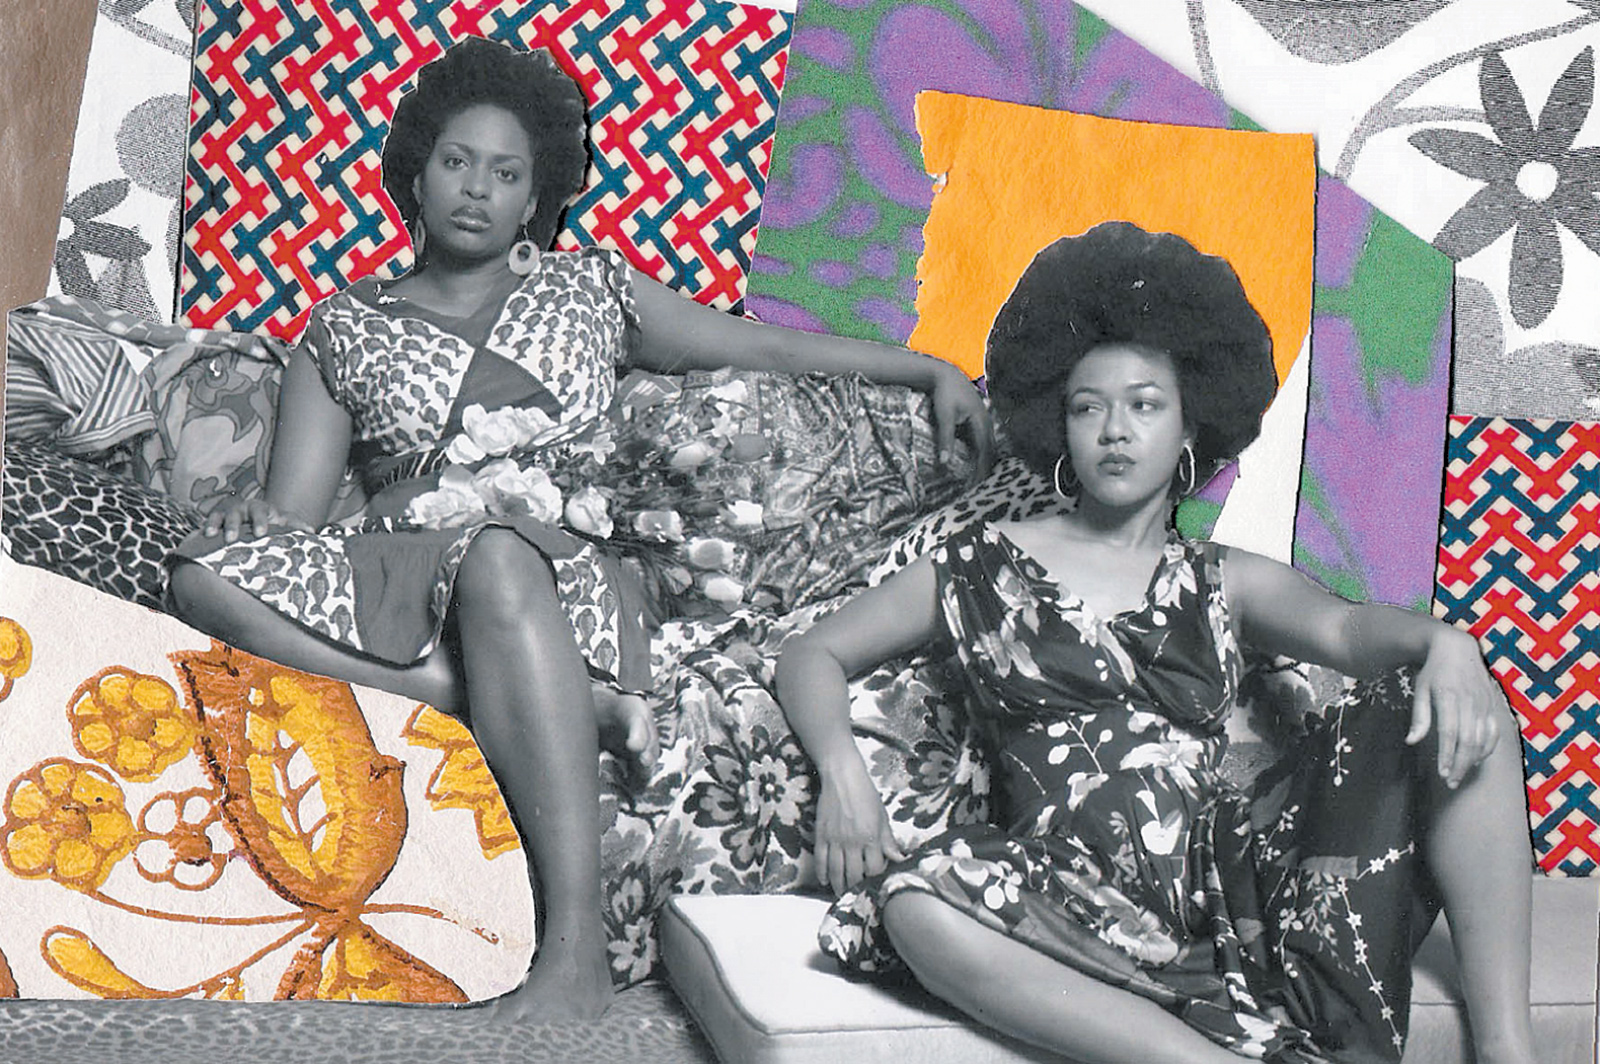 Mickalene Thomas: A Moment’s Pleasure #2, 2007; from the book Muse: Mickalene Thomas: Photographs, just published by Aperture